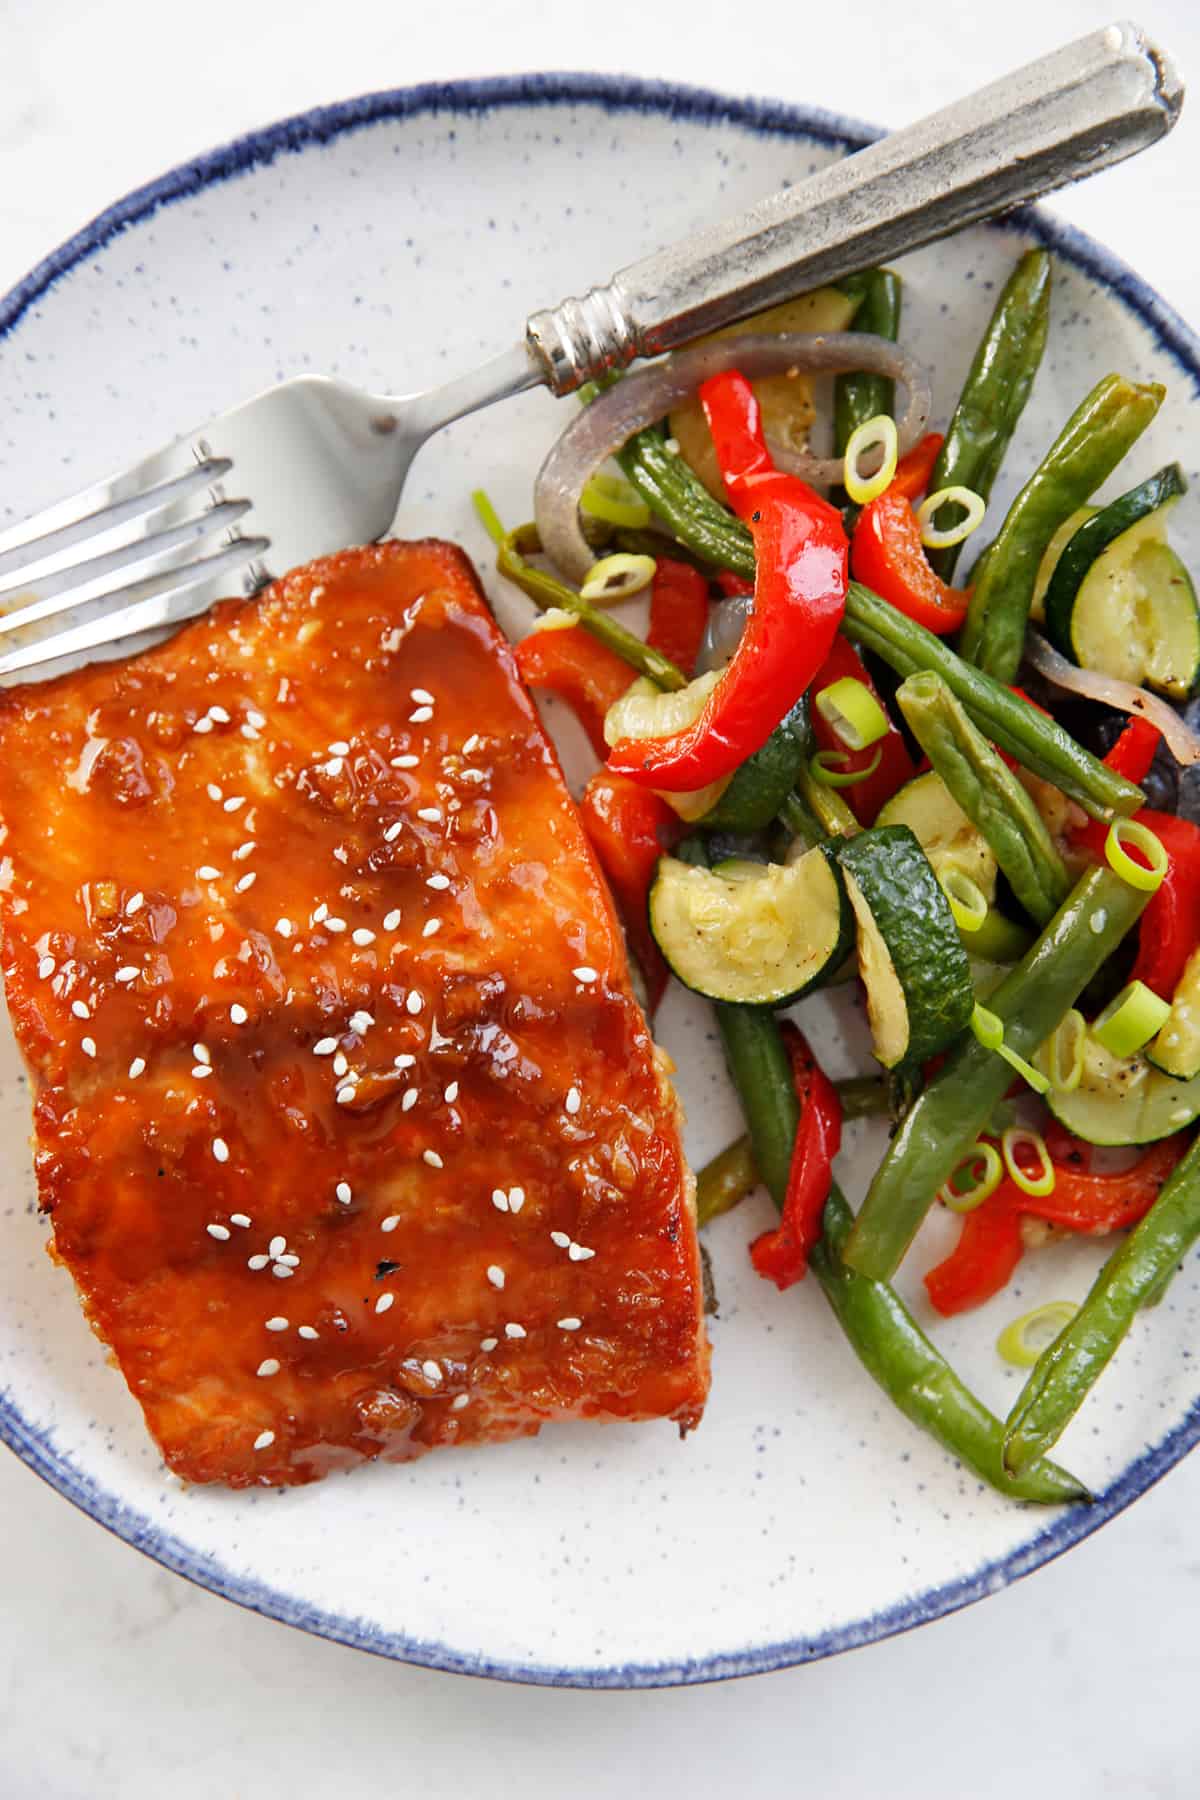 10 Minute Asian Glazed Salmon with Veggies - Anolon Cookware